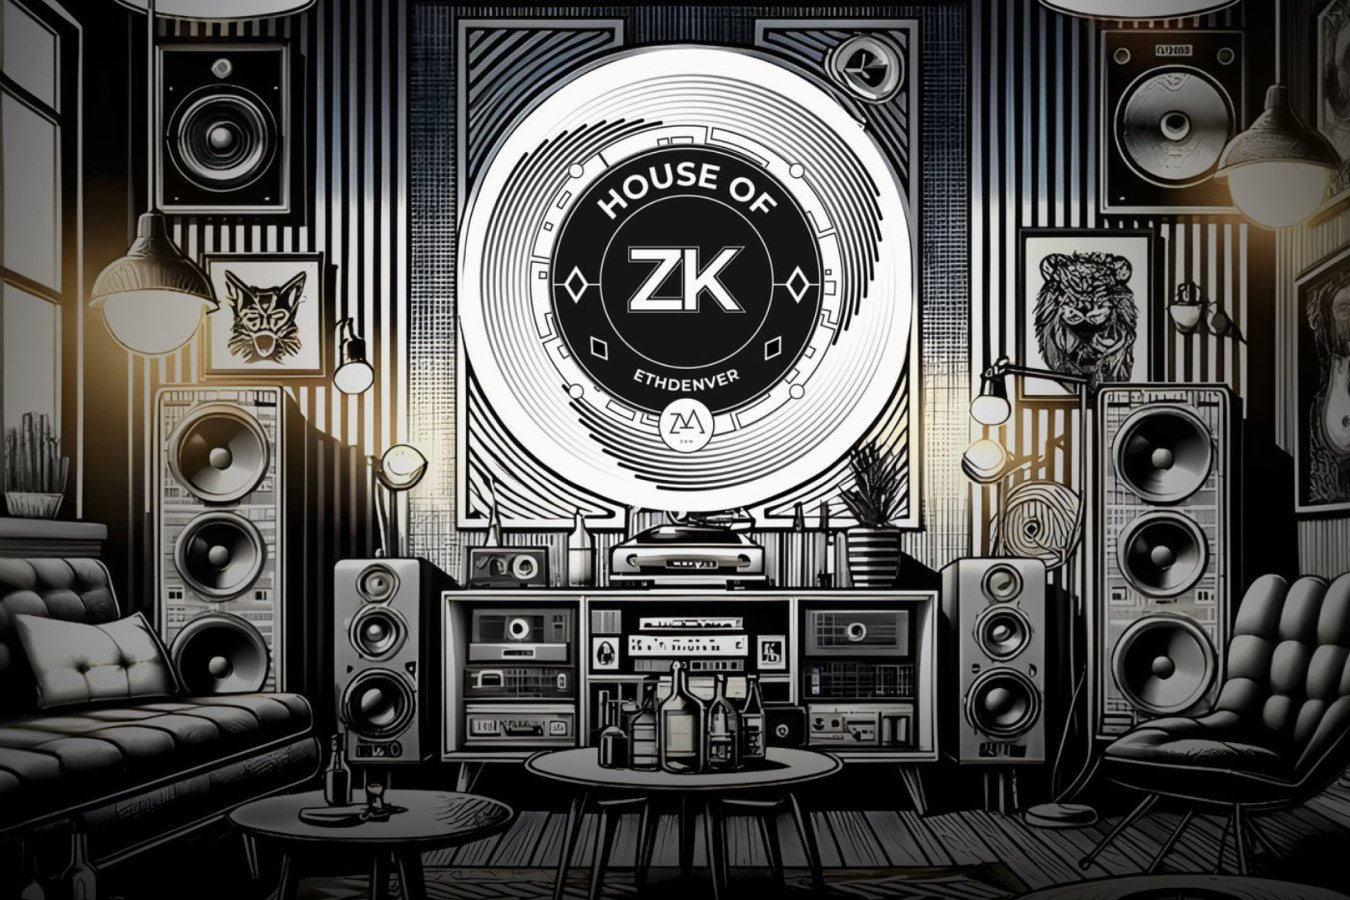 House of ZK